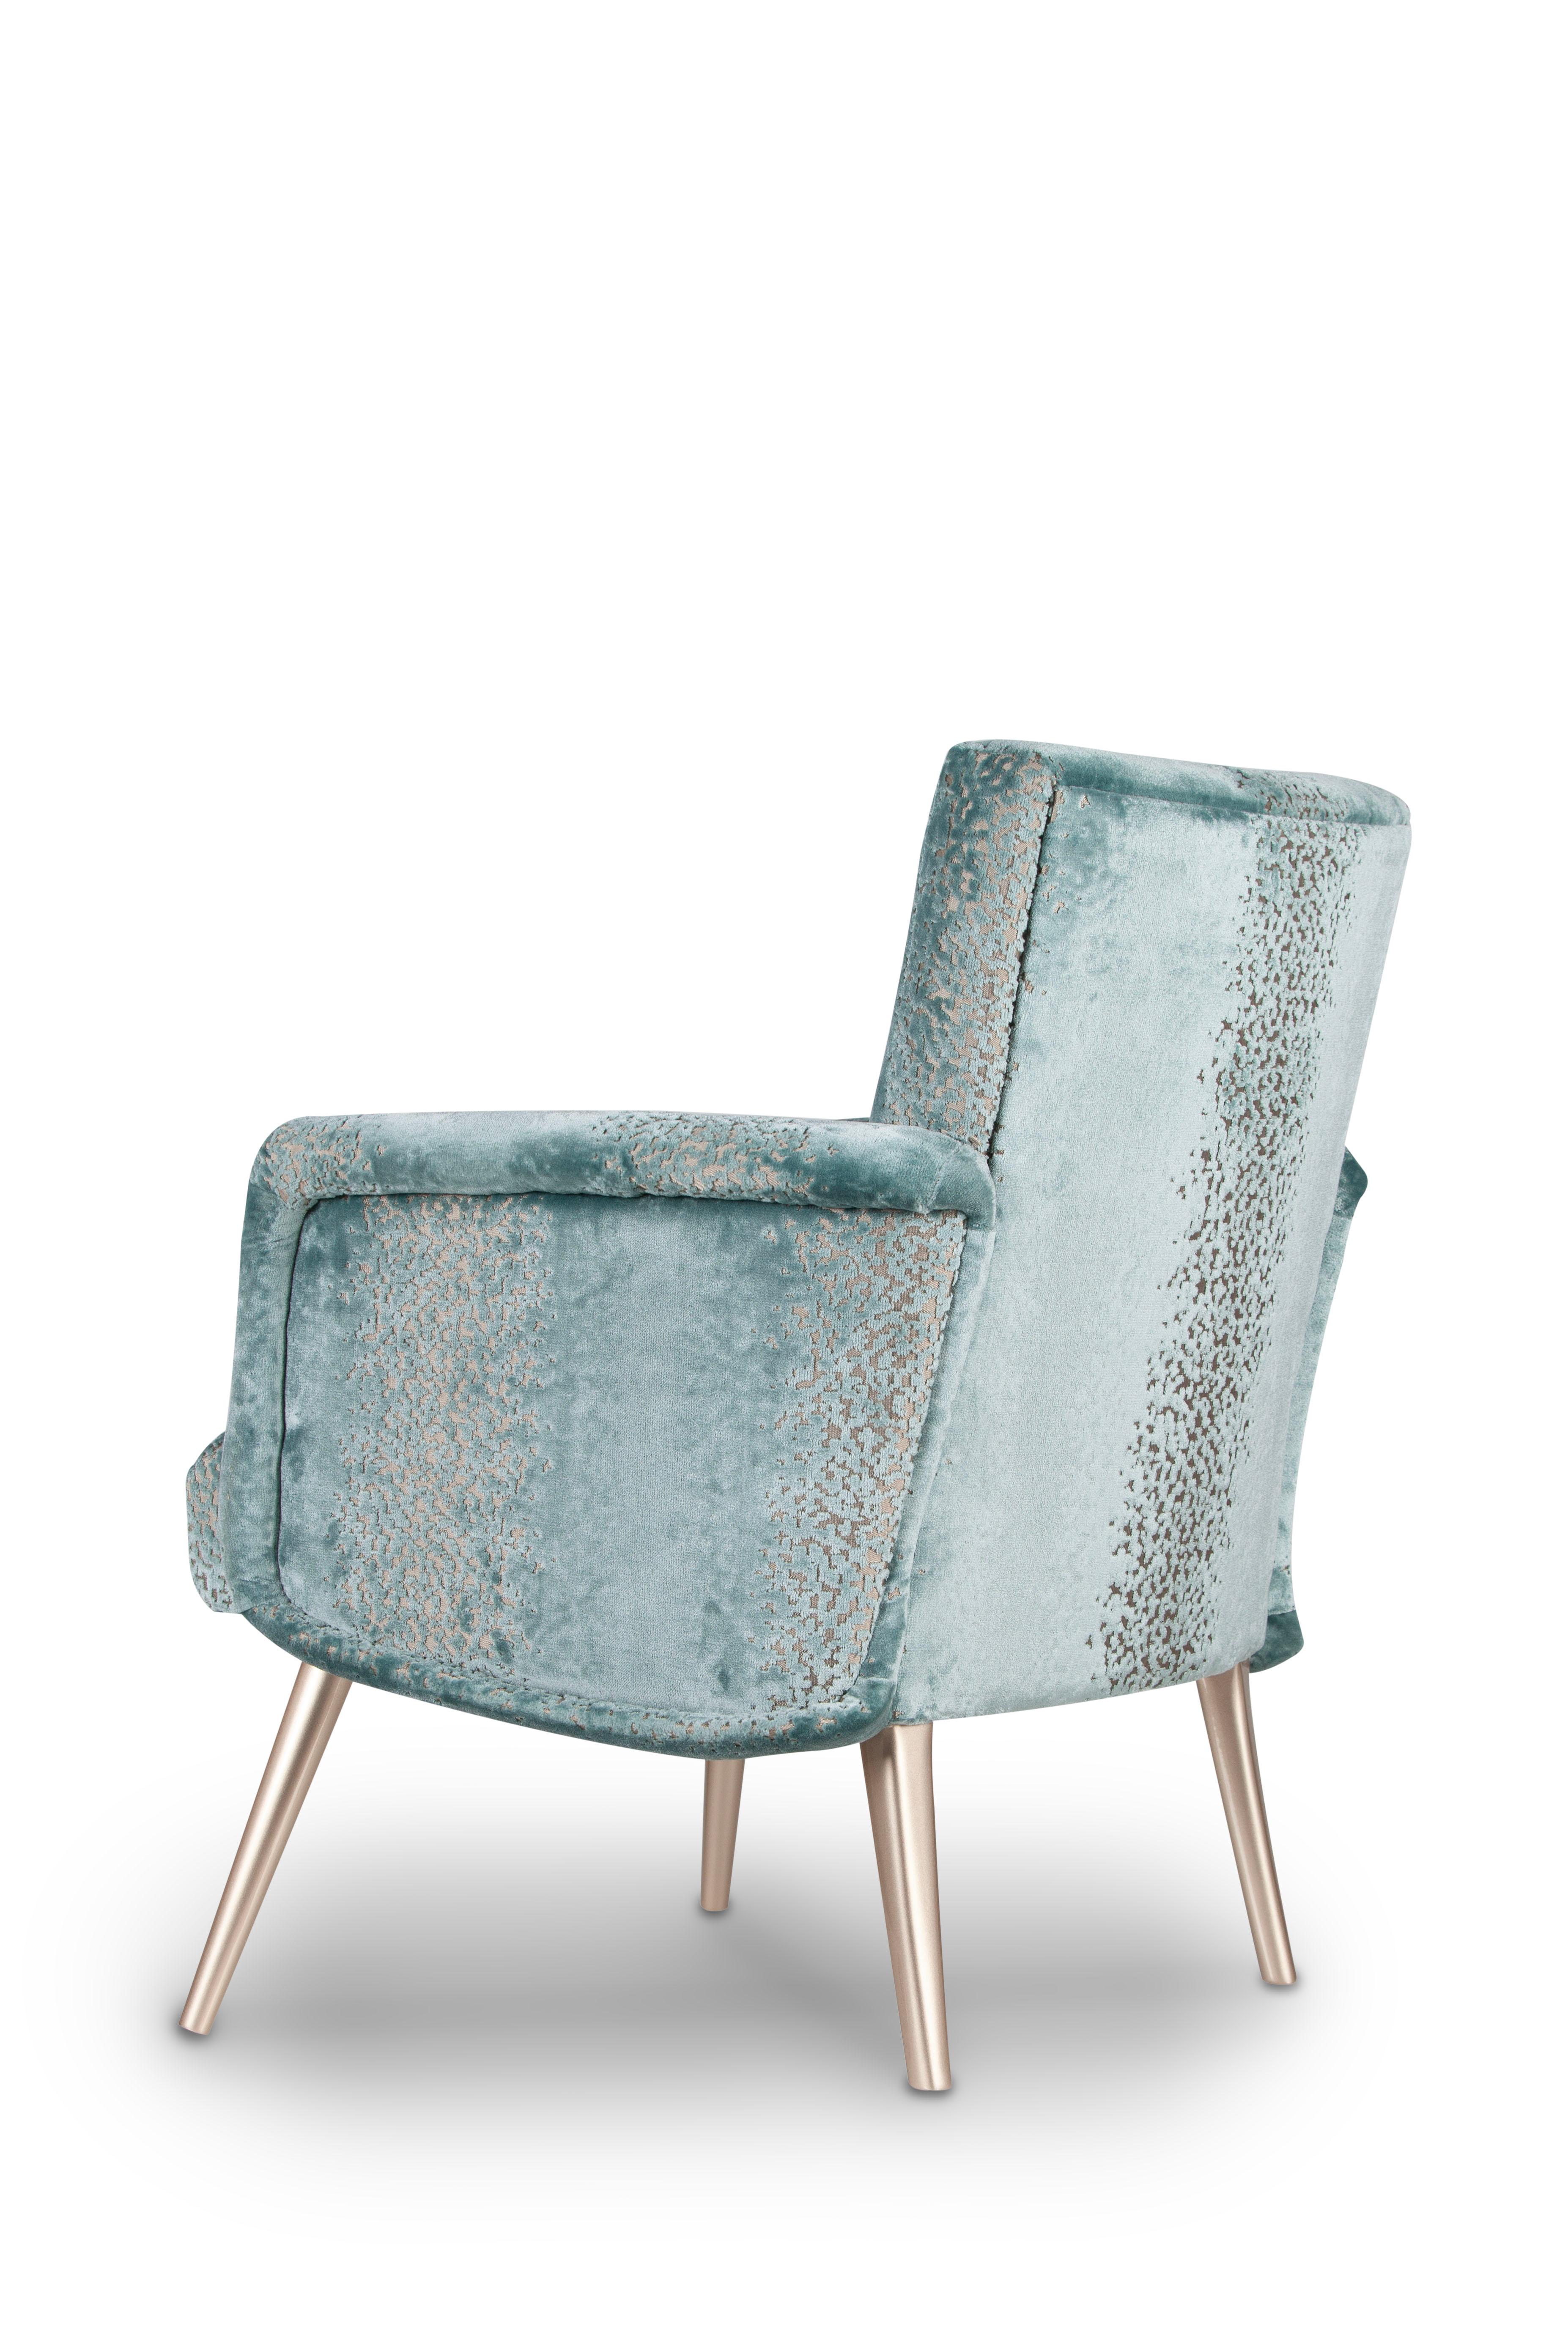 Leo Armchair, Contemporary Collection, Handcrafted in Portugal - Europe by Greenapple.

Leo puts a modern twist on the traditional armchair.
The sumptuous upholstery in mint green velvet goes together effortlessly with the champagne lacquered